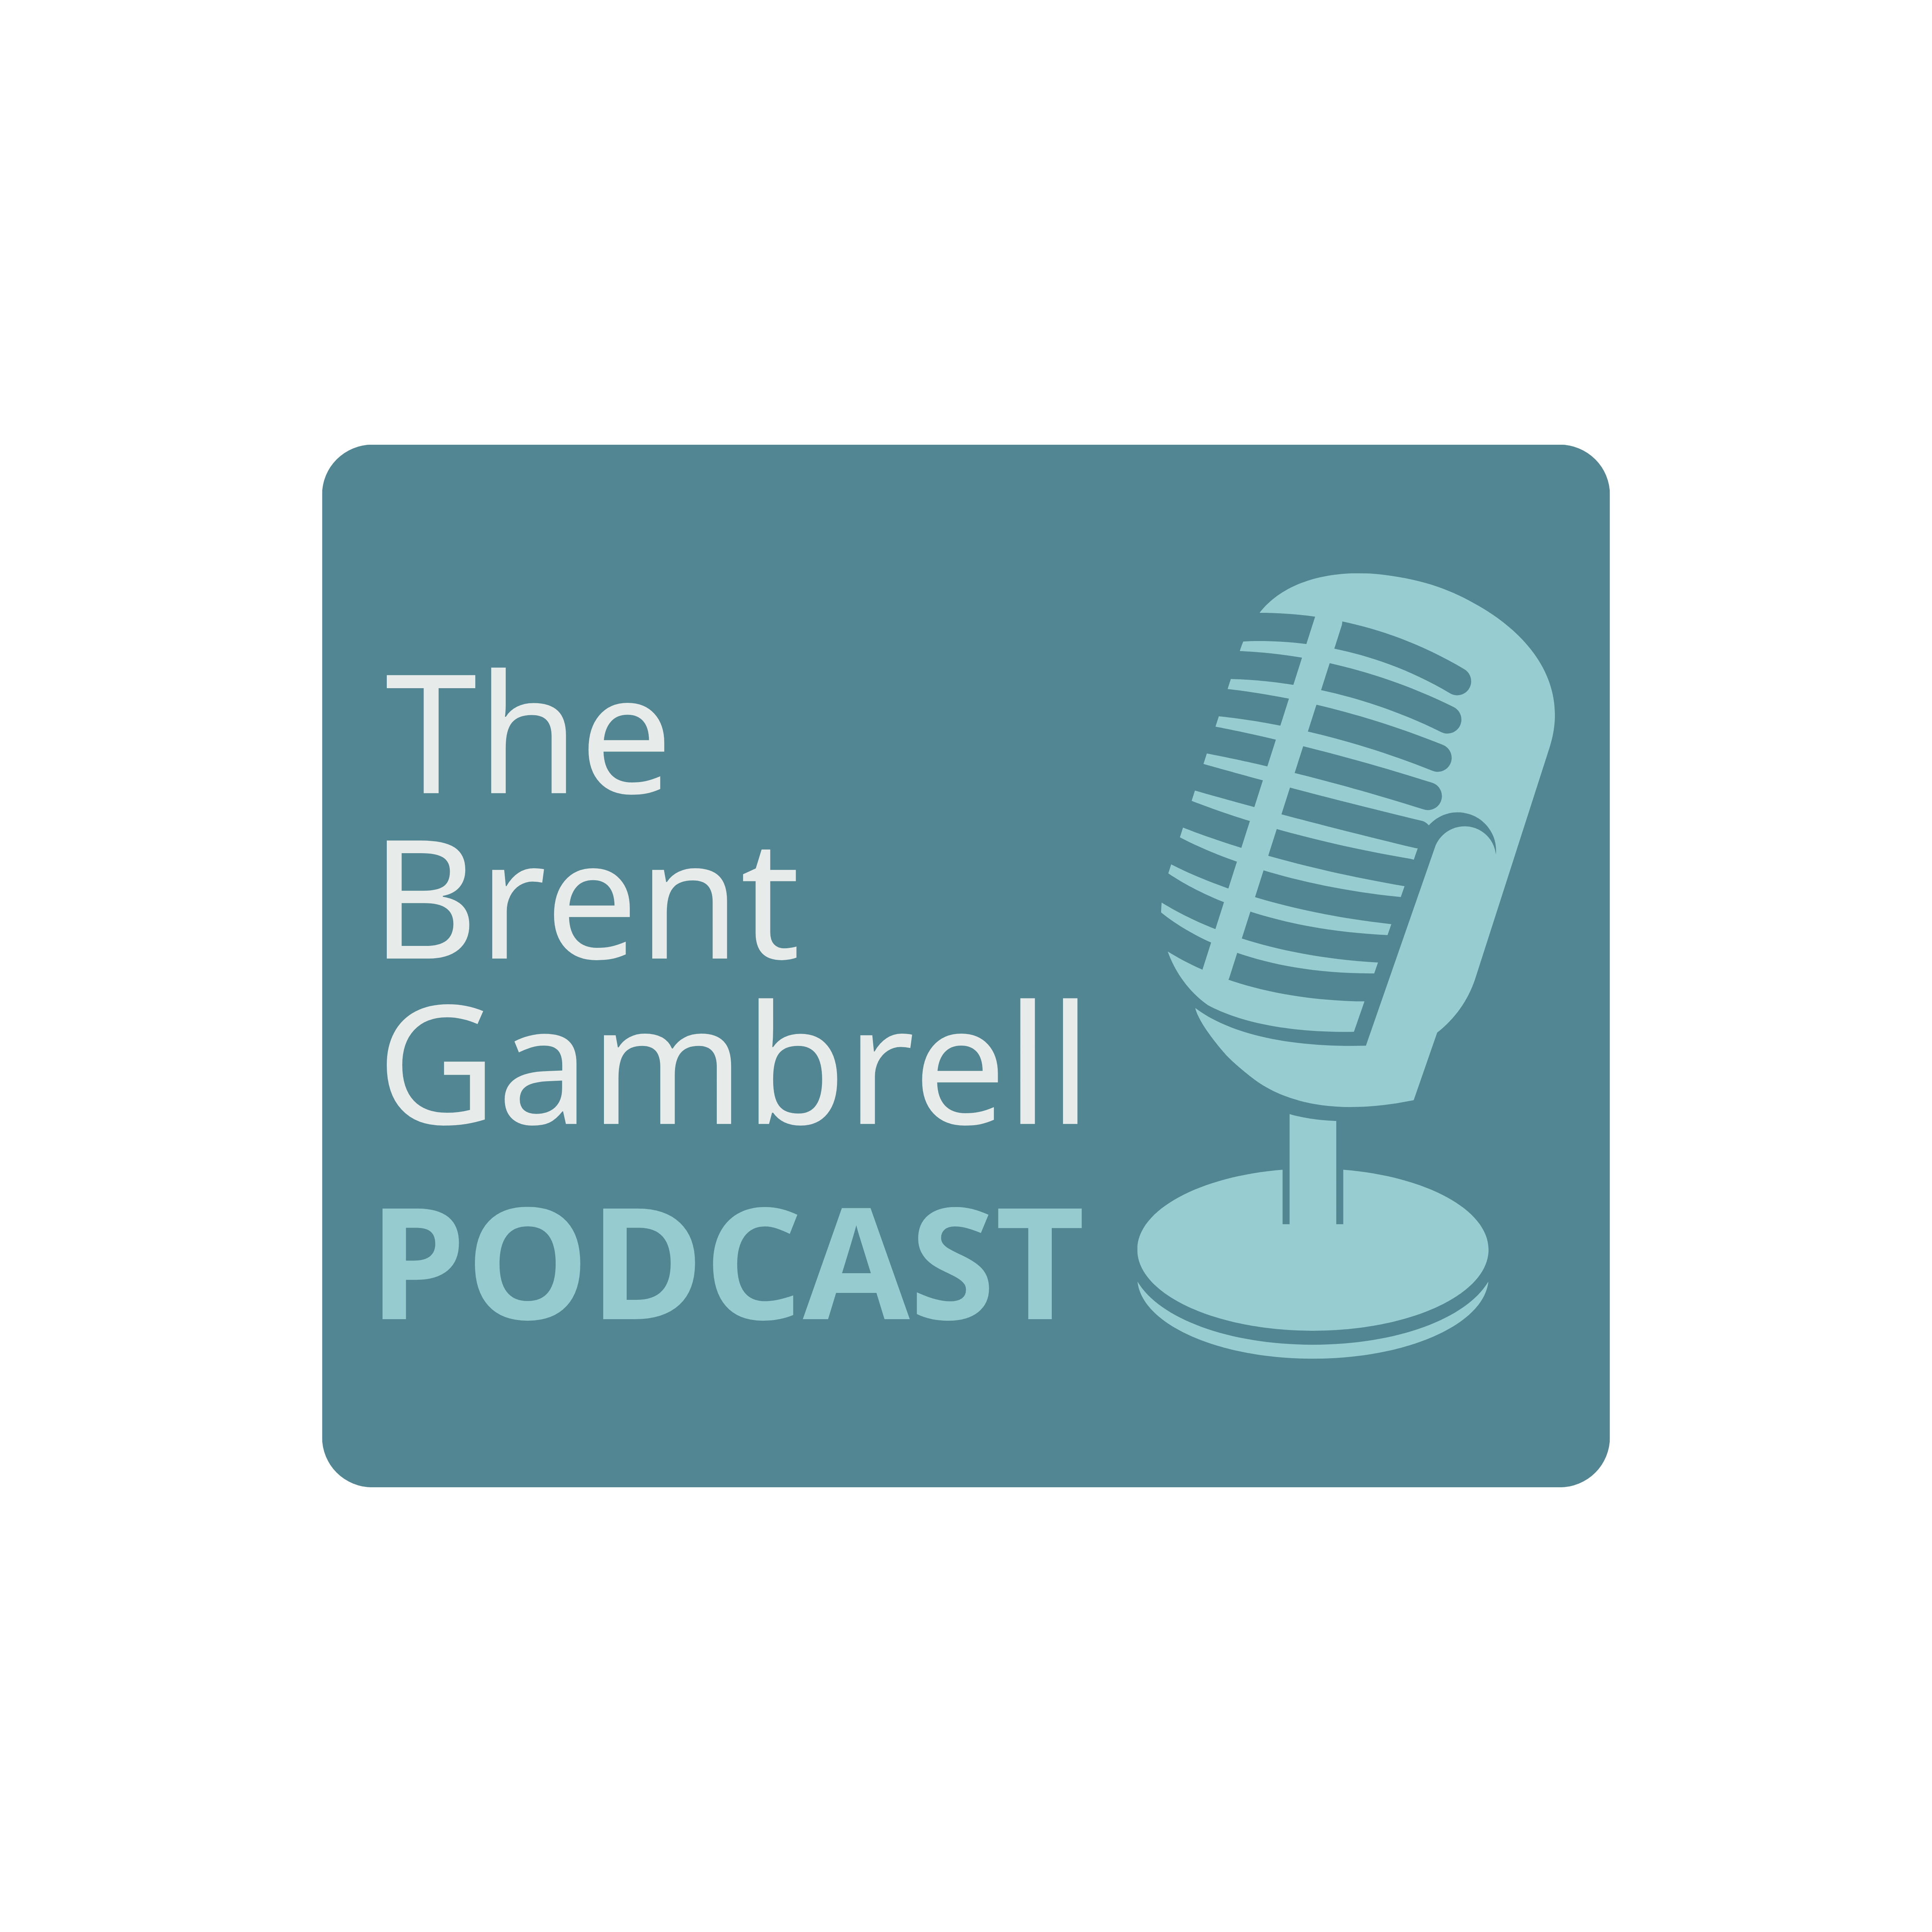 The Brent Gambrell Podcast